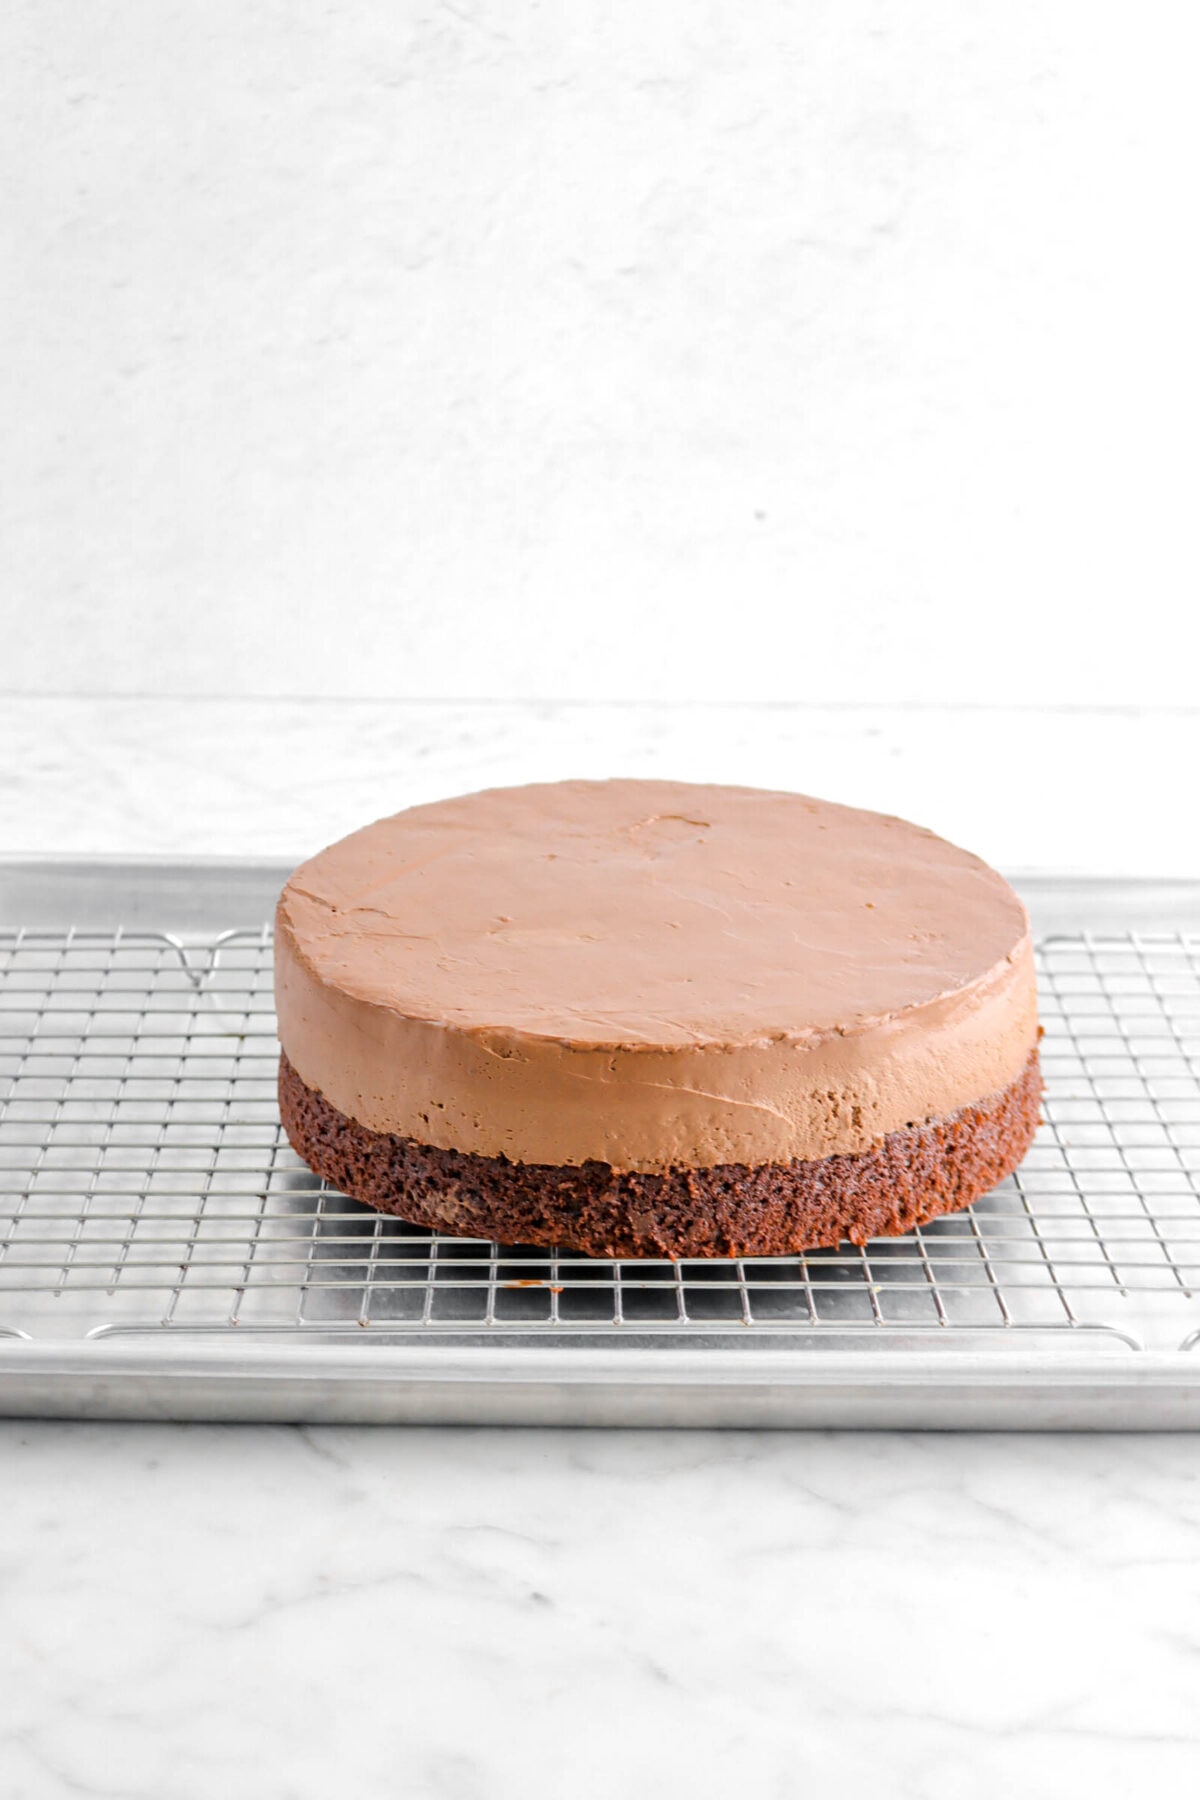 edges of mousse smoothed out on top of cake.